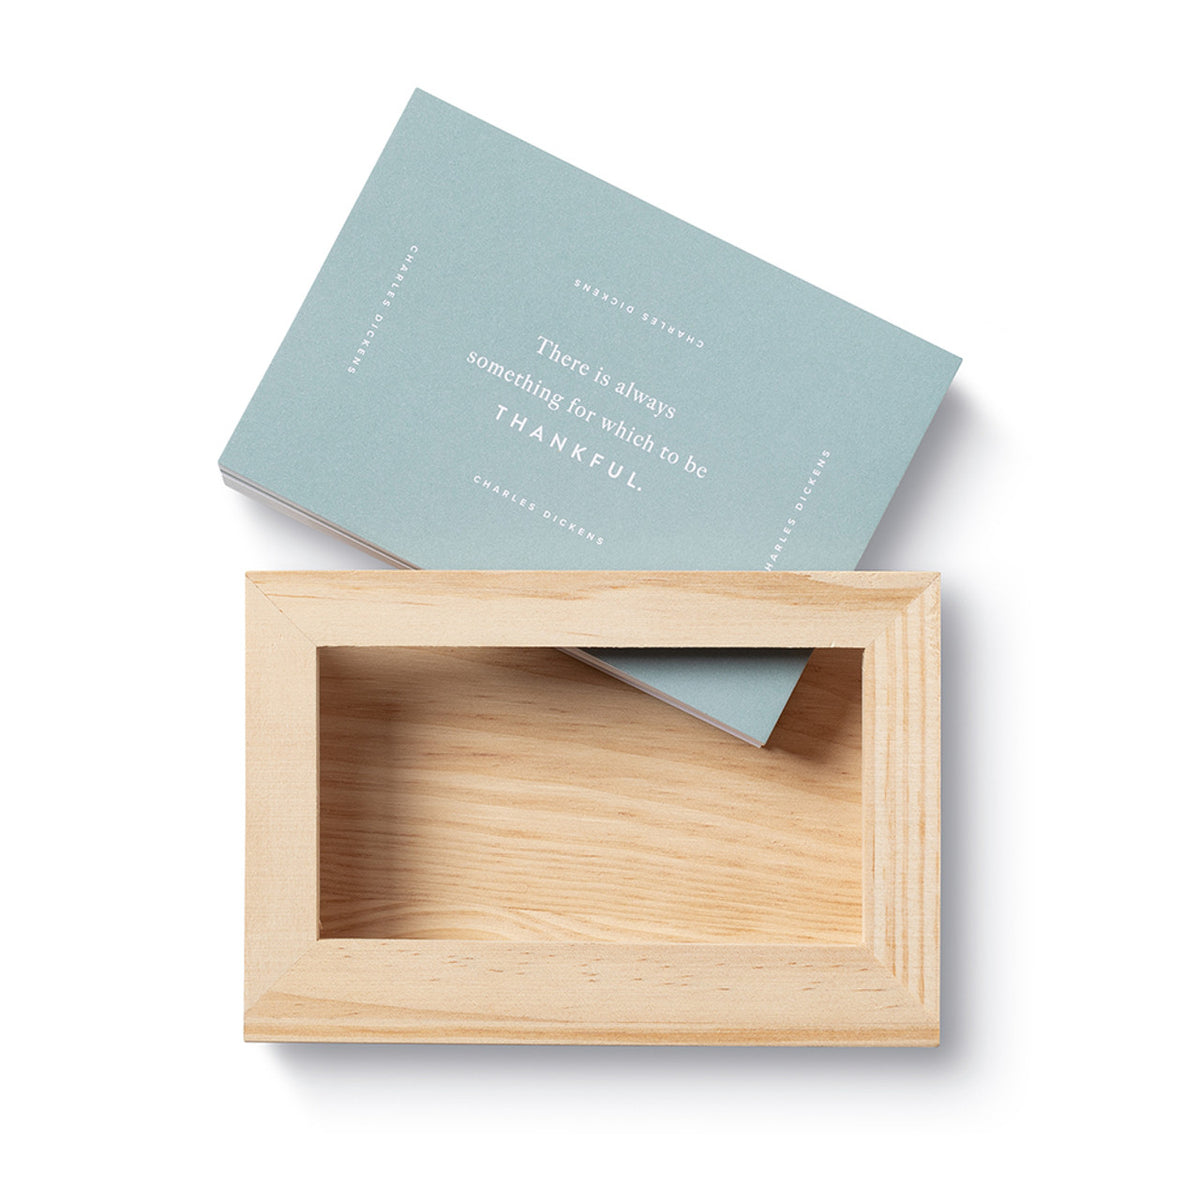 Box/frame of the weekly inspirational desk set